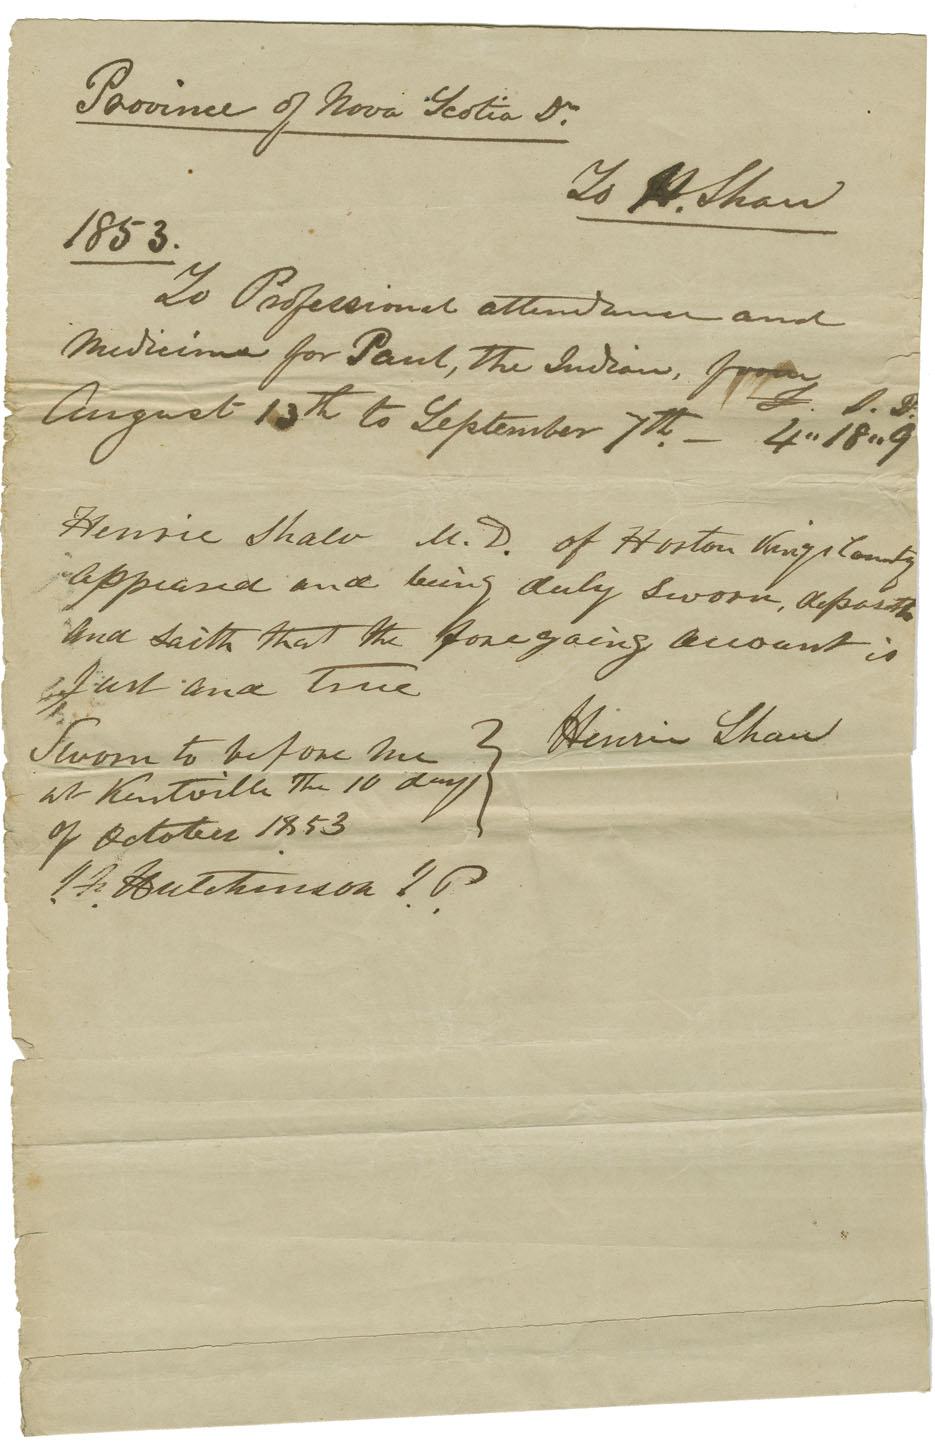 Account of Dr. Shaw for attending Mi'kmaq near Horton.